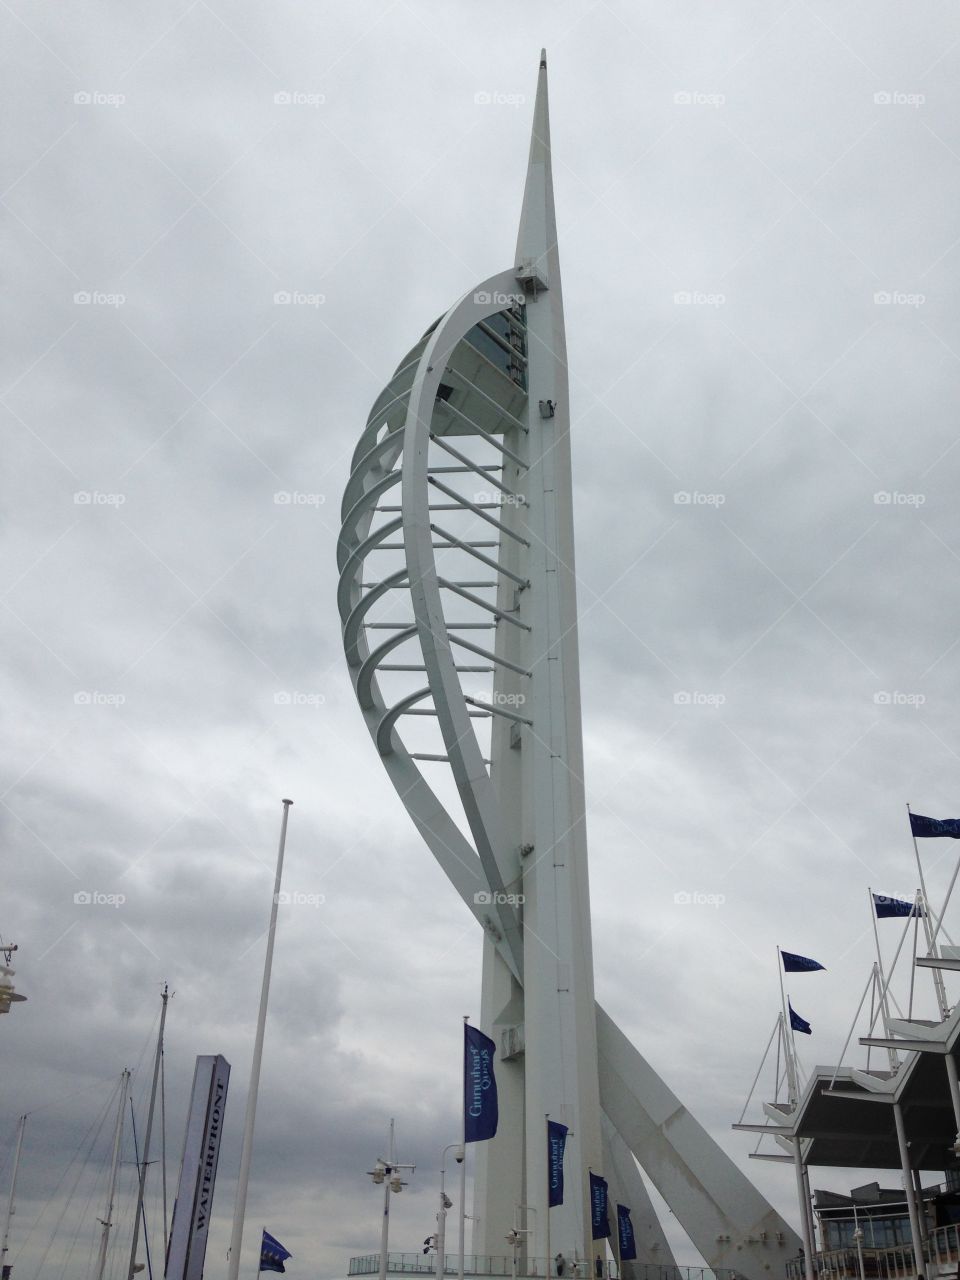 The Spinnaker Tower, Portsmouth, England.